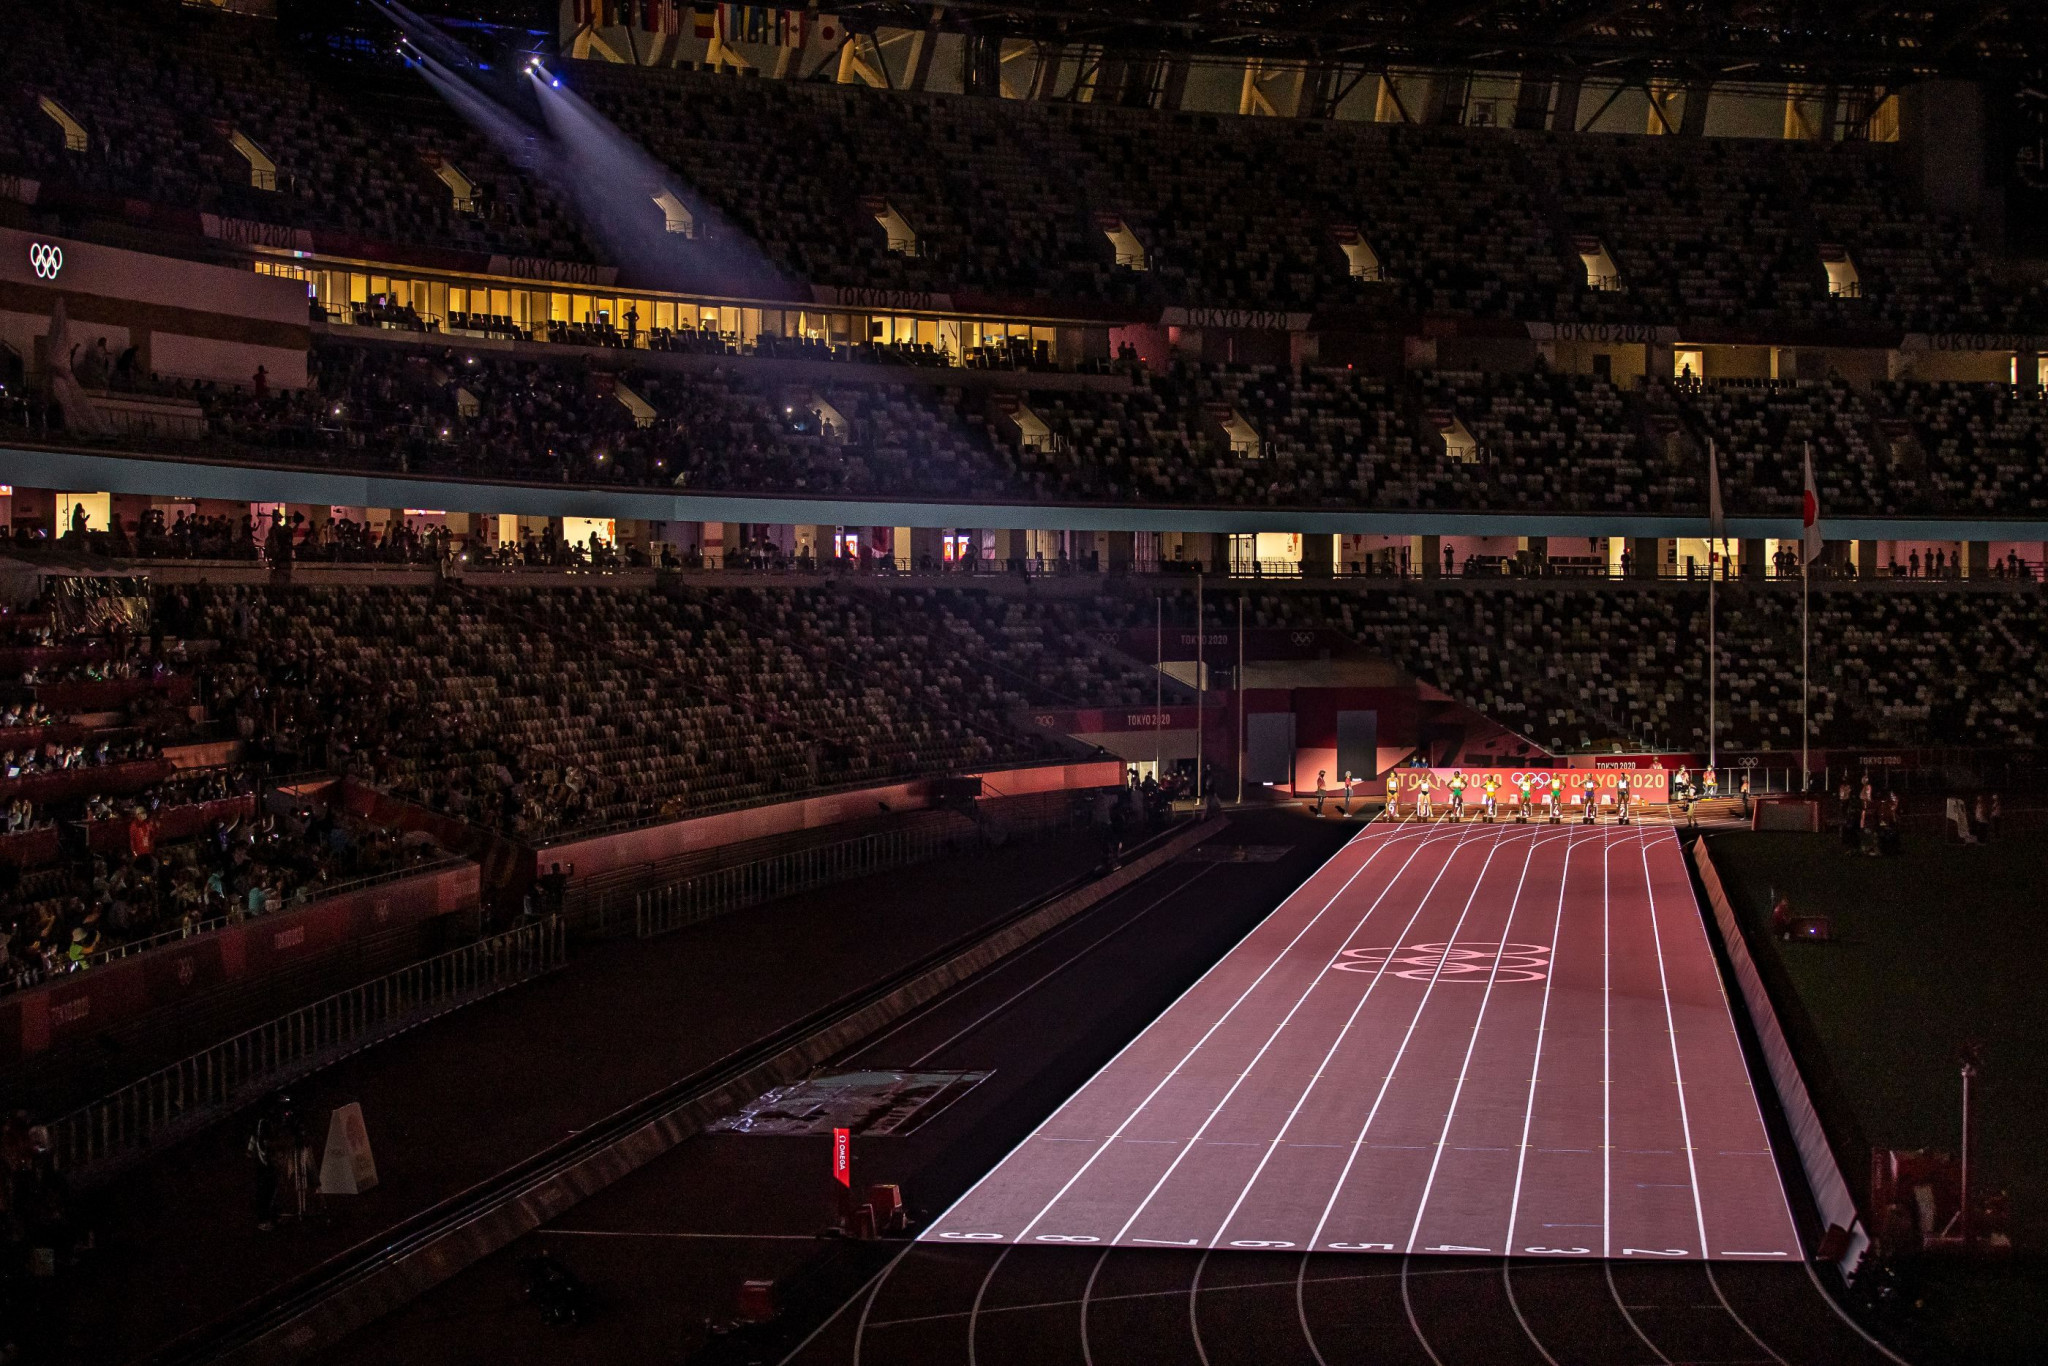 Projections were used prior to the 100m athletics finals at Tokyo 2020 ©Getty Images